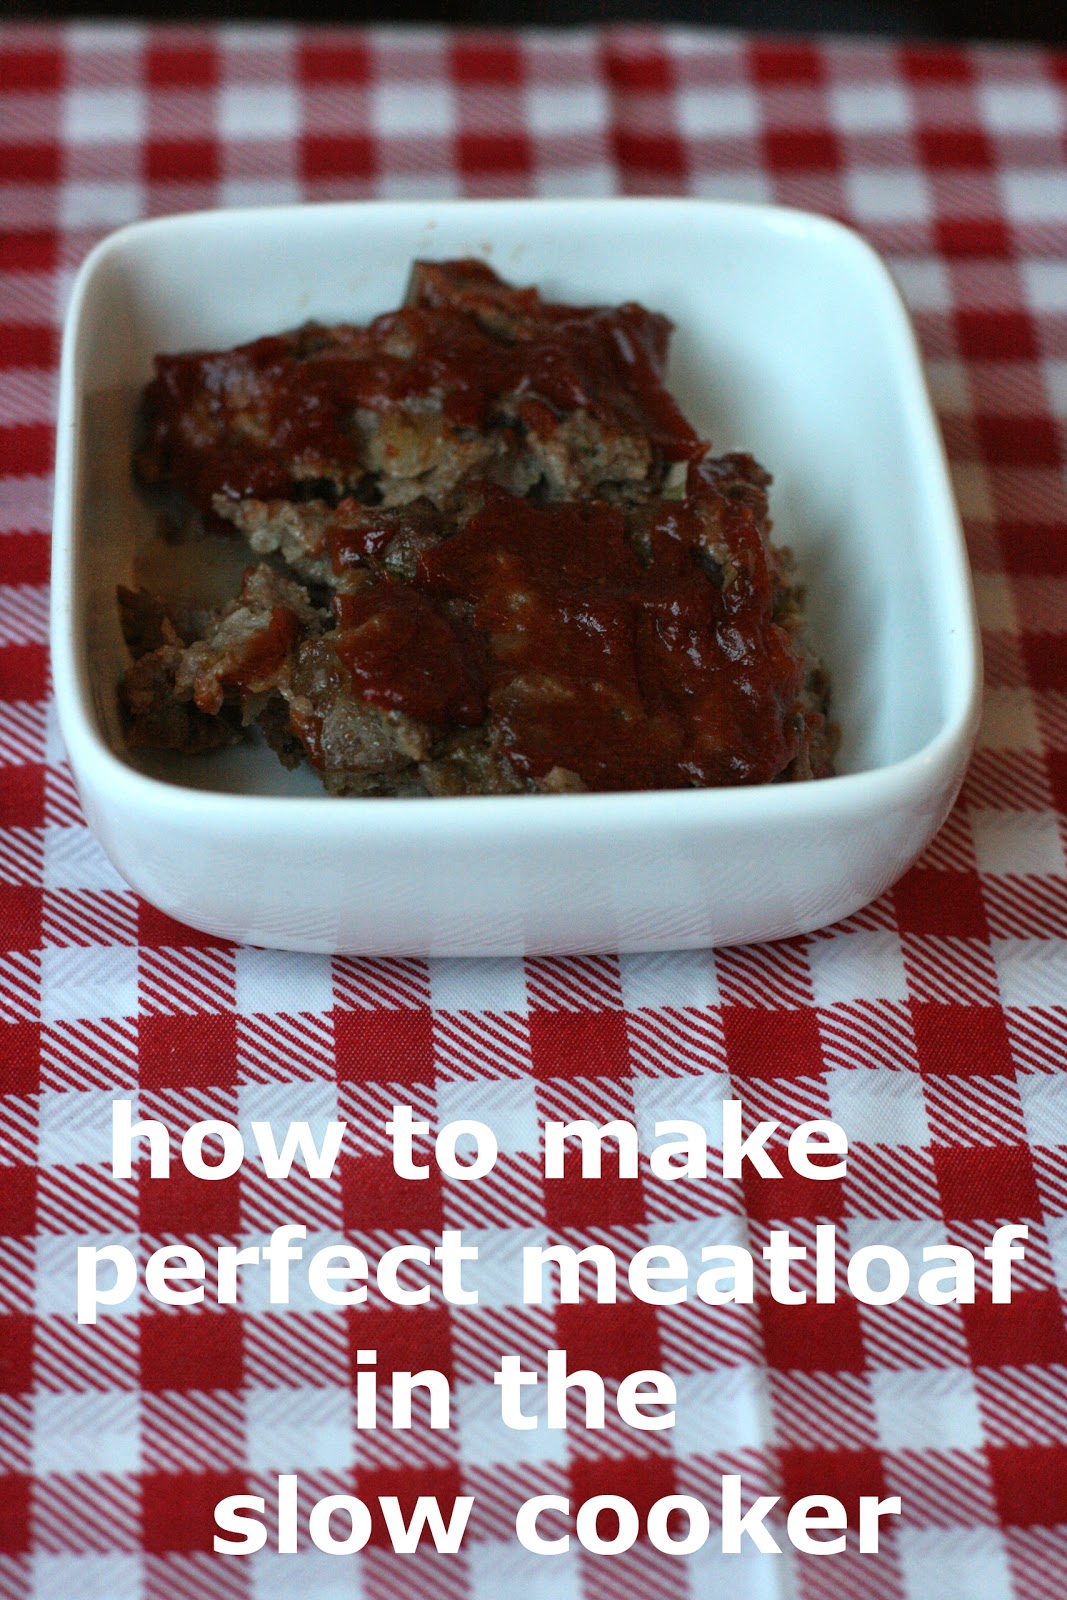 A Year of Slow Cooking: CrockPot Meatloaf Recipe